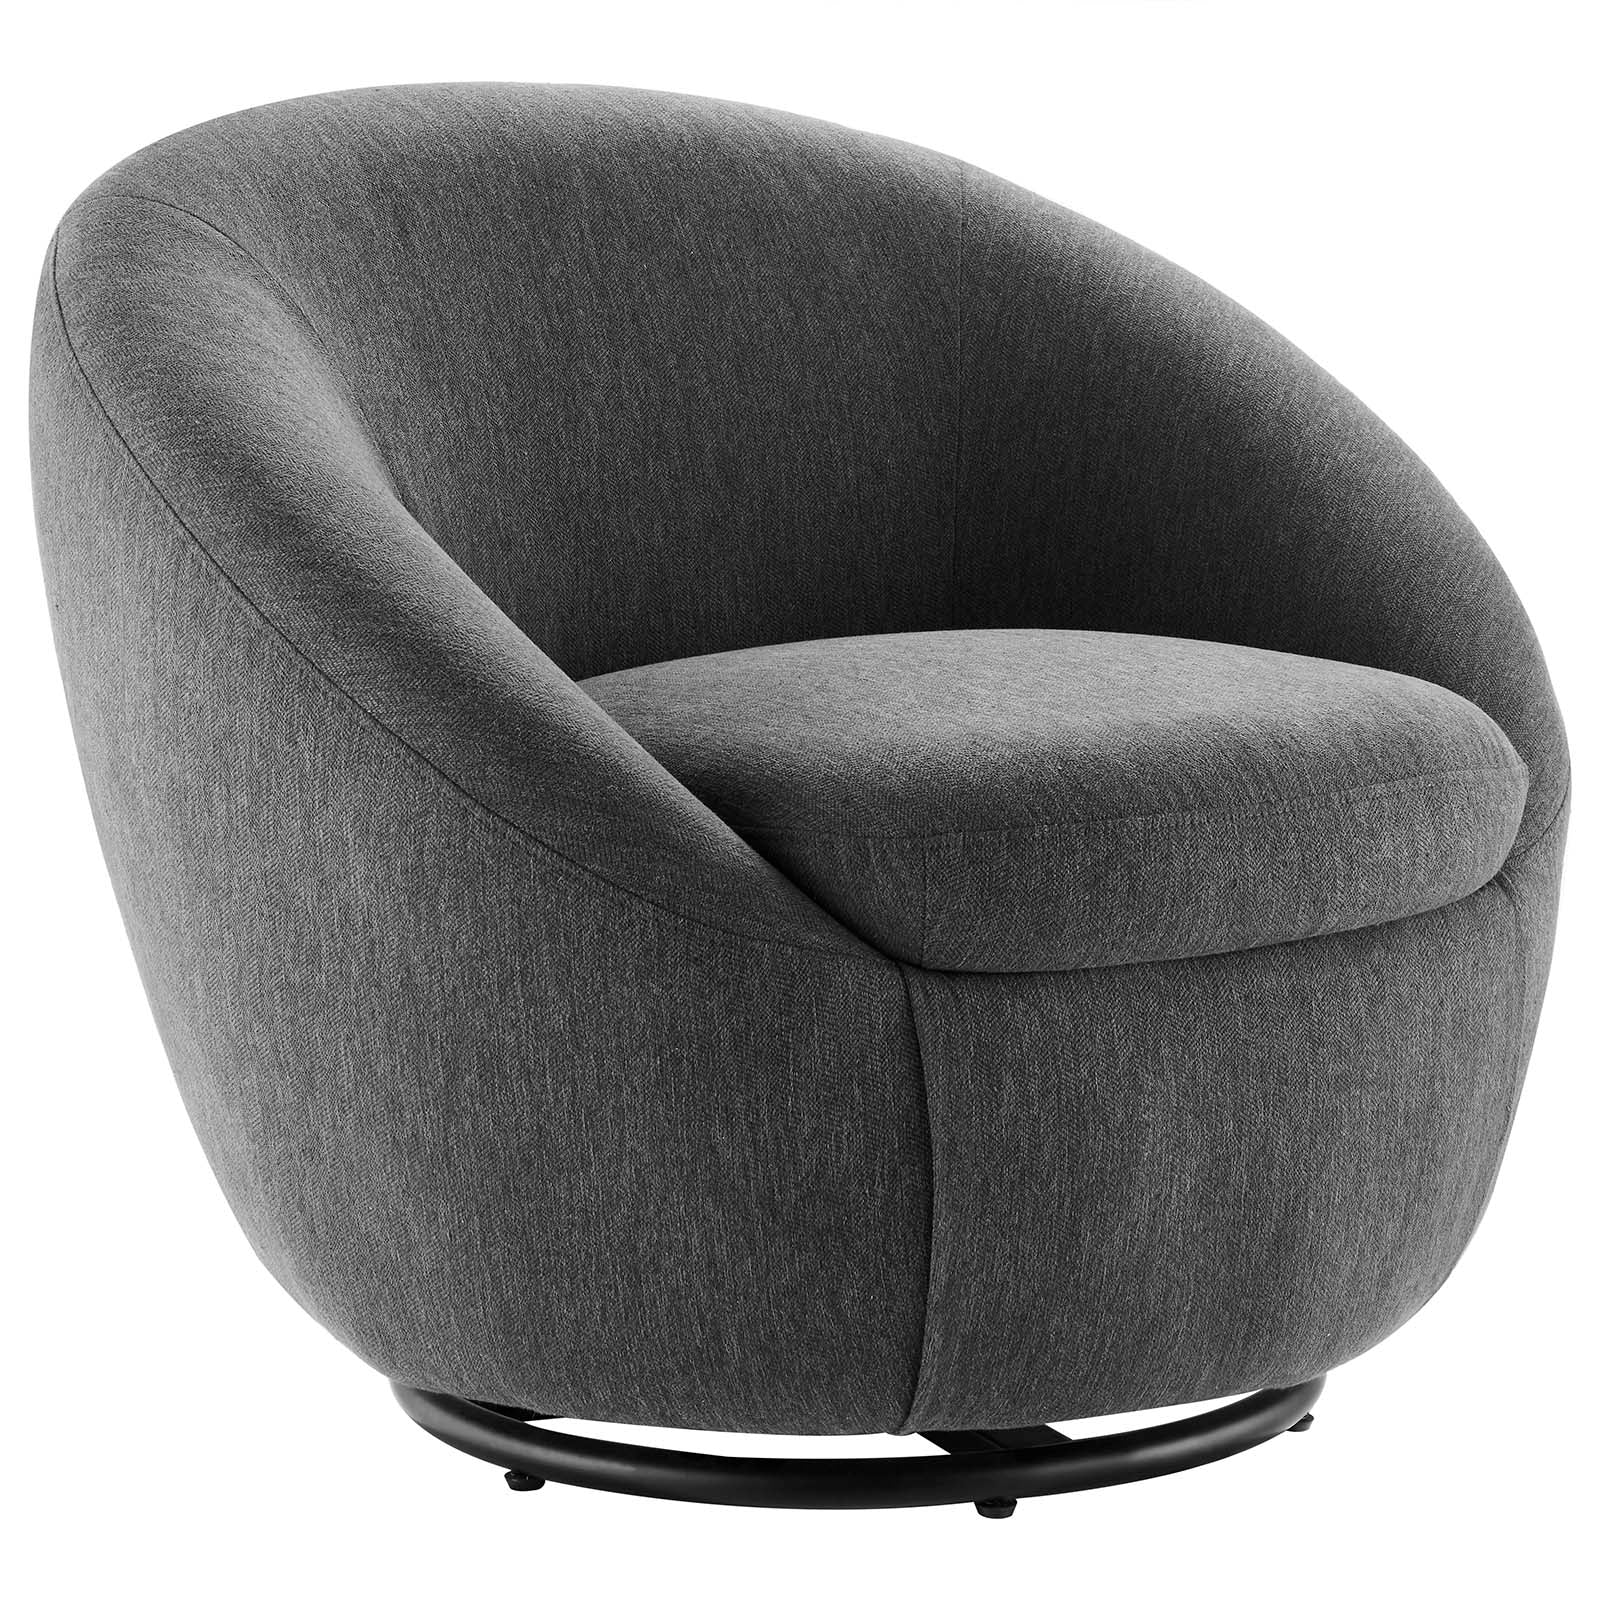 Modway Accent Chairs - Buttercup Fabric Upholstered Upholstered Fabric Swivel Chair Black Charcoal